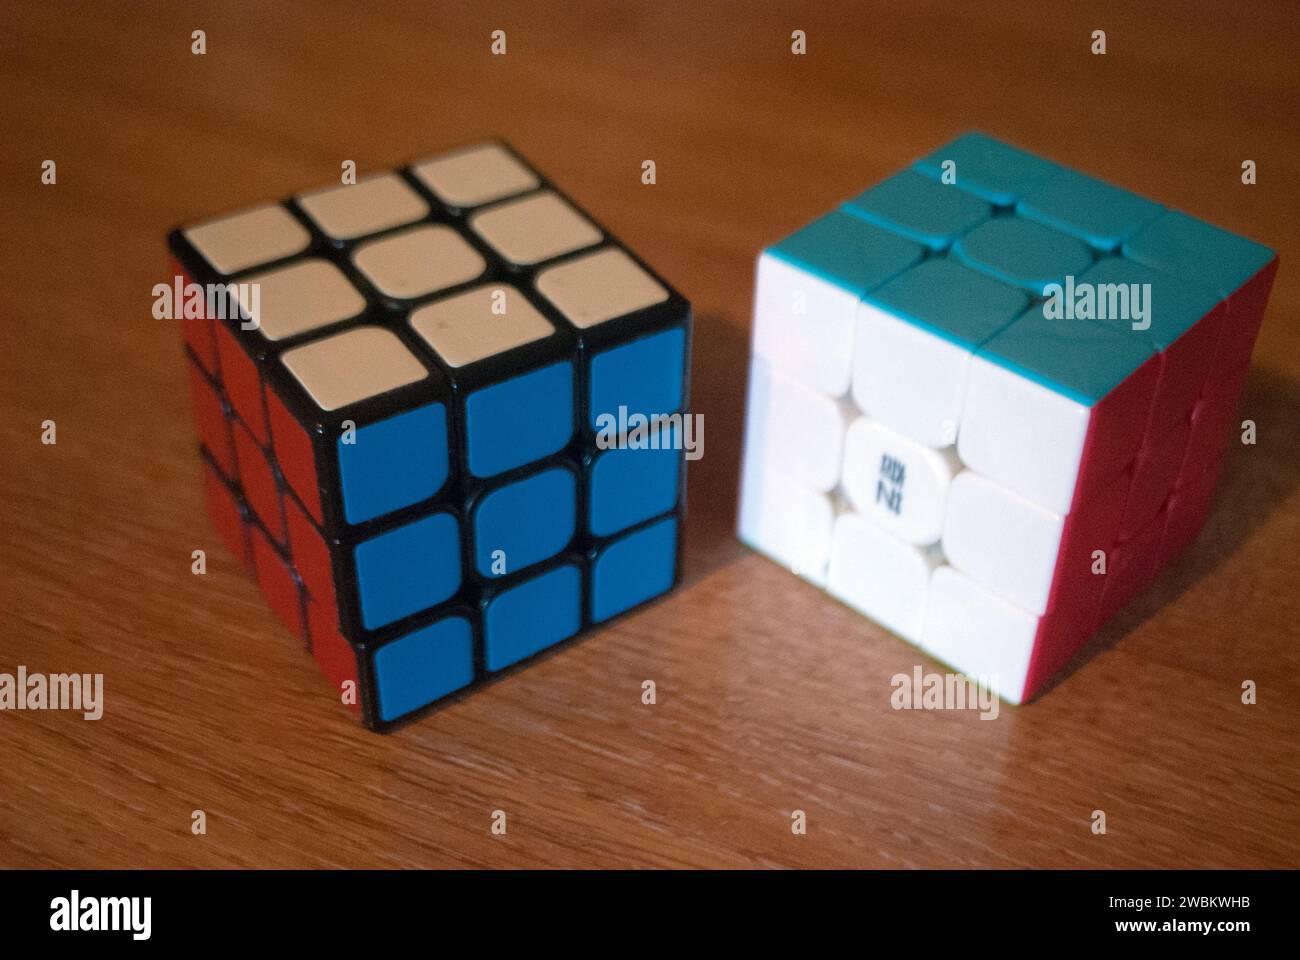 Two rubik's cubes on a desk showing red white and blue sides Stock Photo